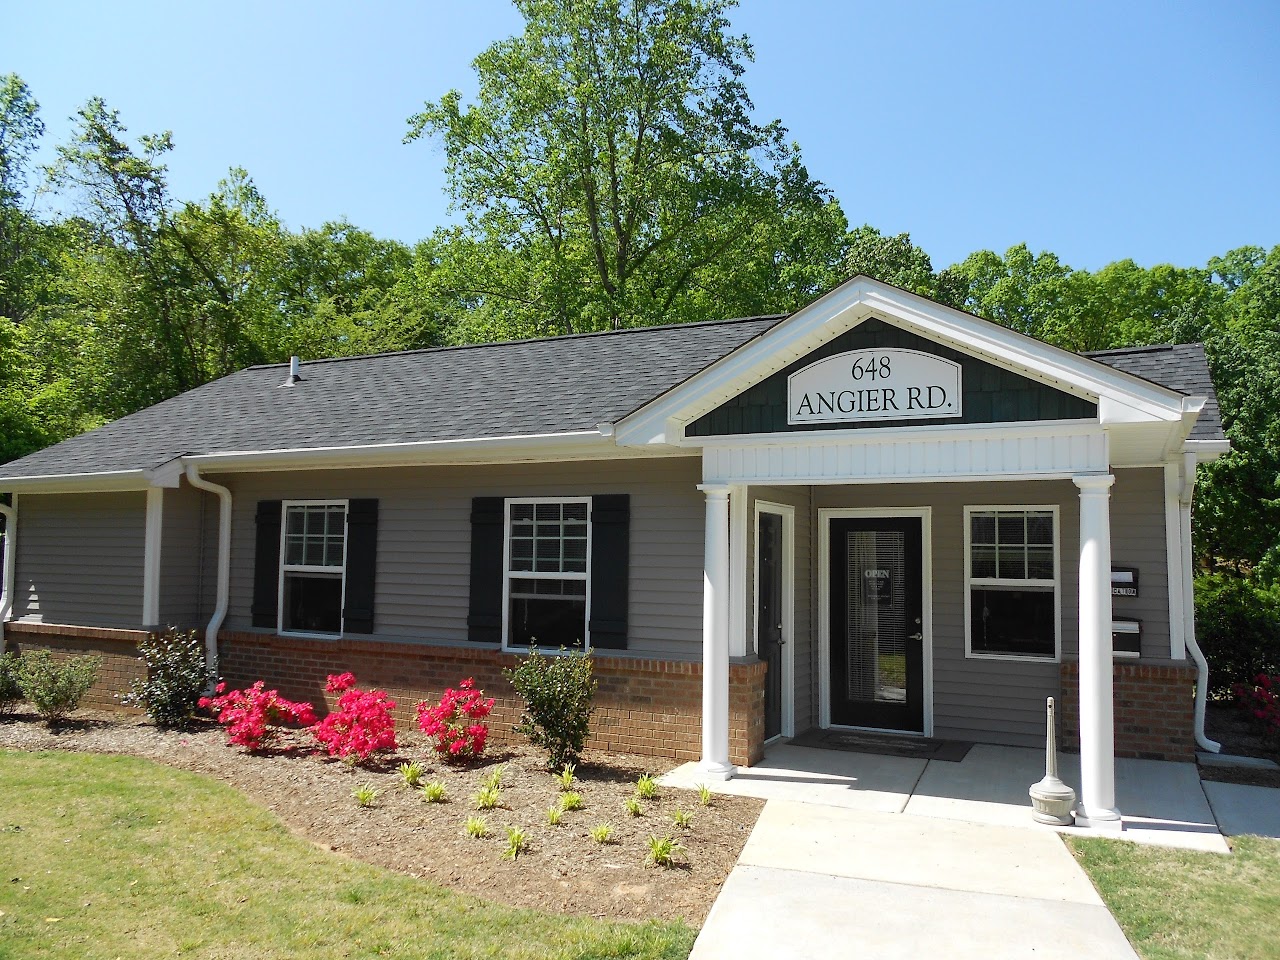 Photo of BAILEY PLACE. Affordable housing located at 609 A HILLSIDE COURT FUQUAY VARINA, NC 27526